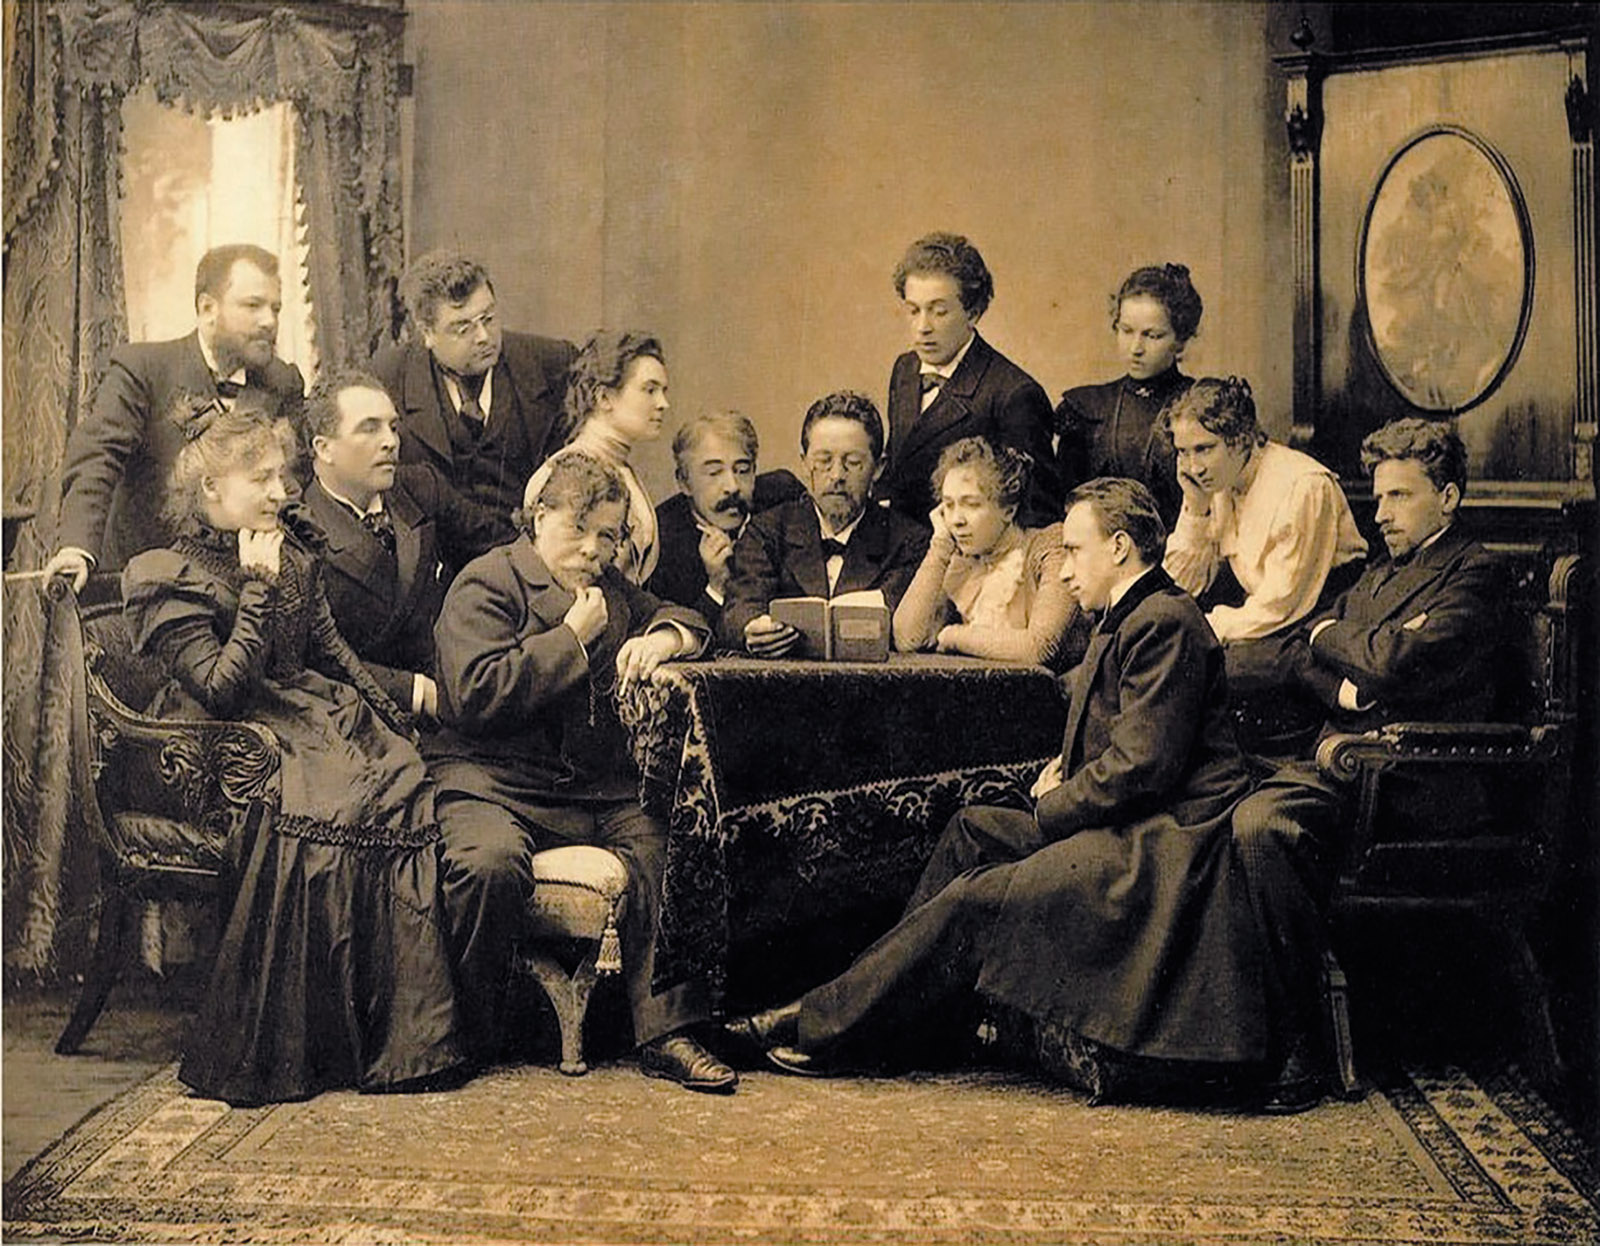 Anton Chekhov reading his play The Seagull to members of the Moscow Art Theater company, 1898